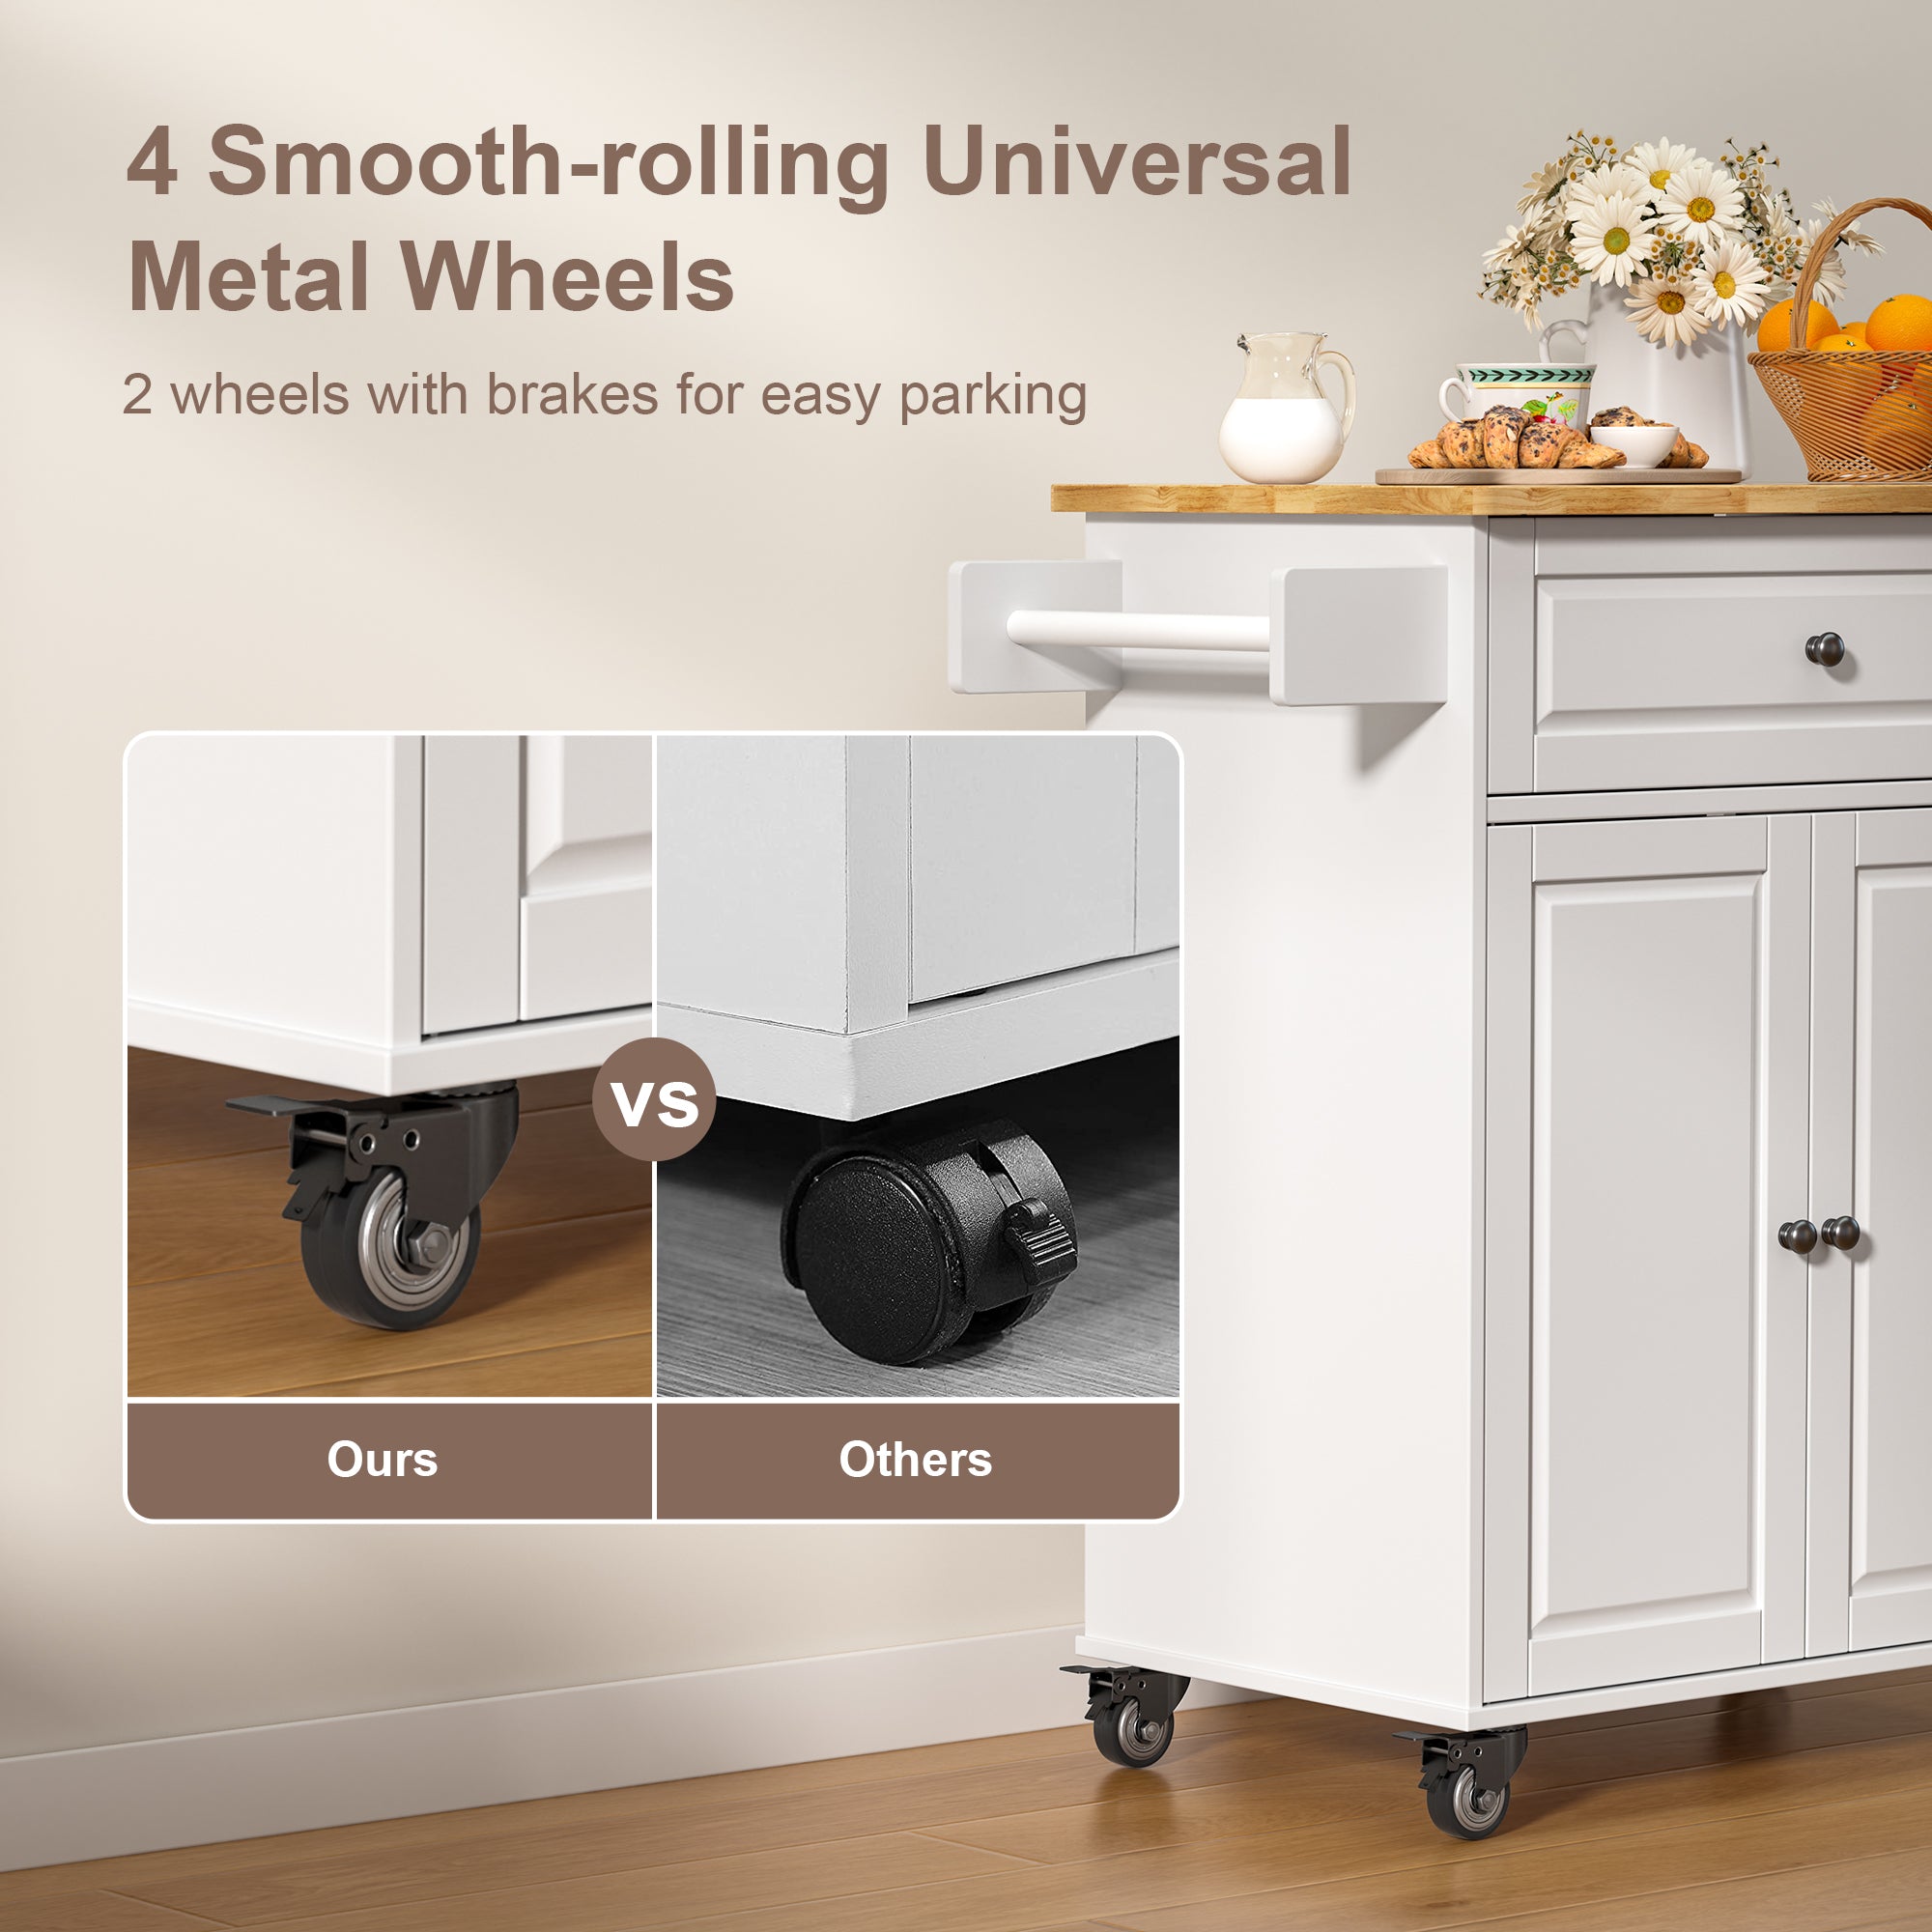 Gizoon AK61 Kitchen Storage Cart Rolling Cabinet on Mental Wheels with Drawer